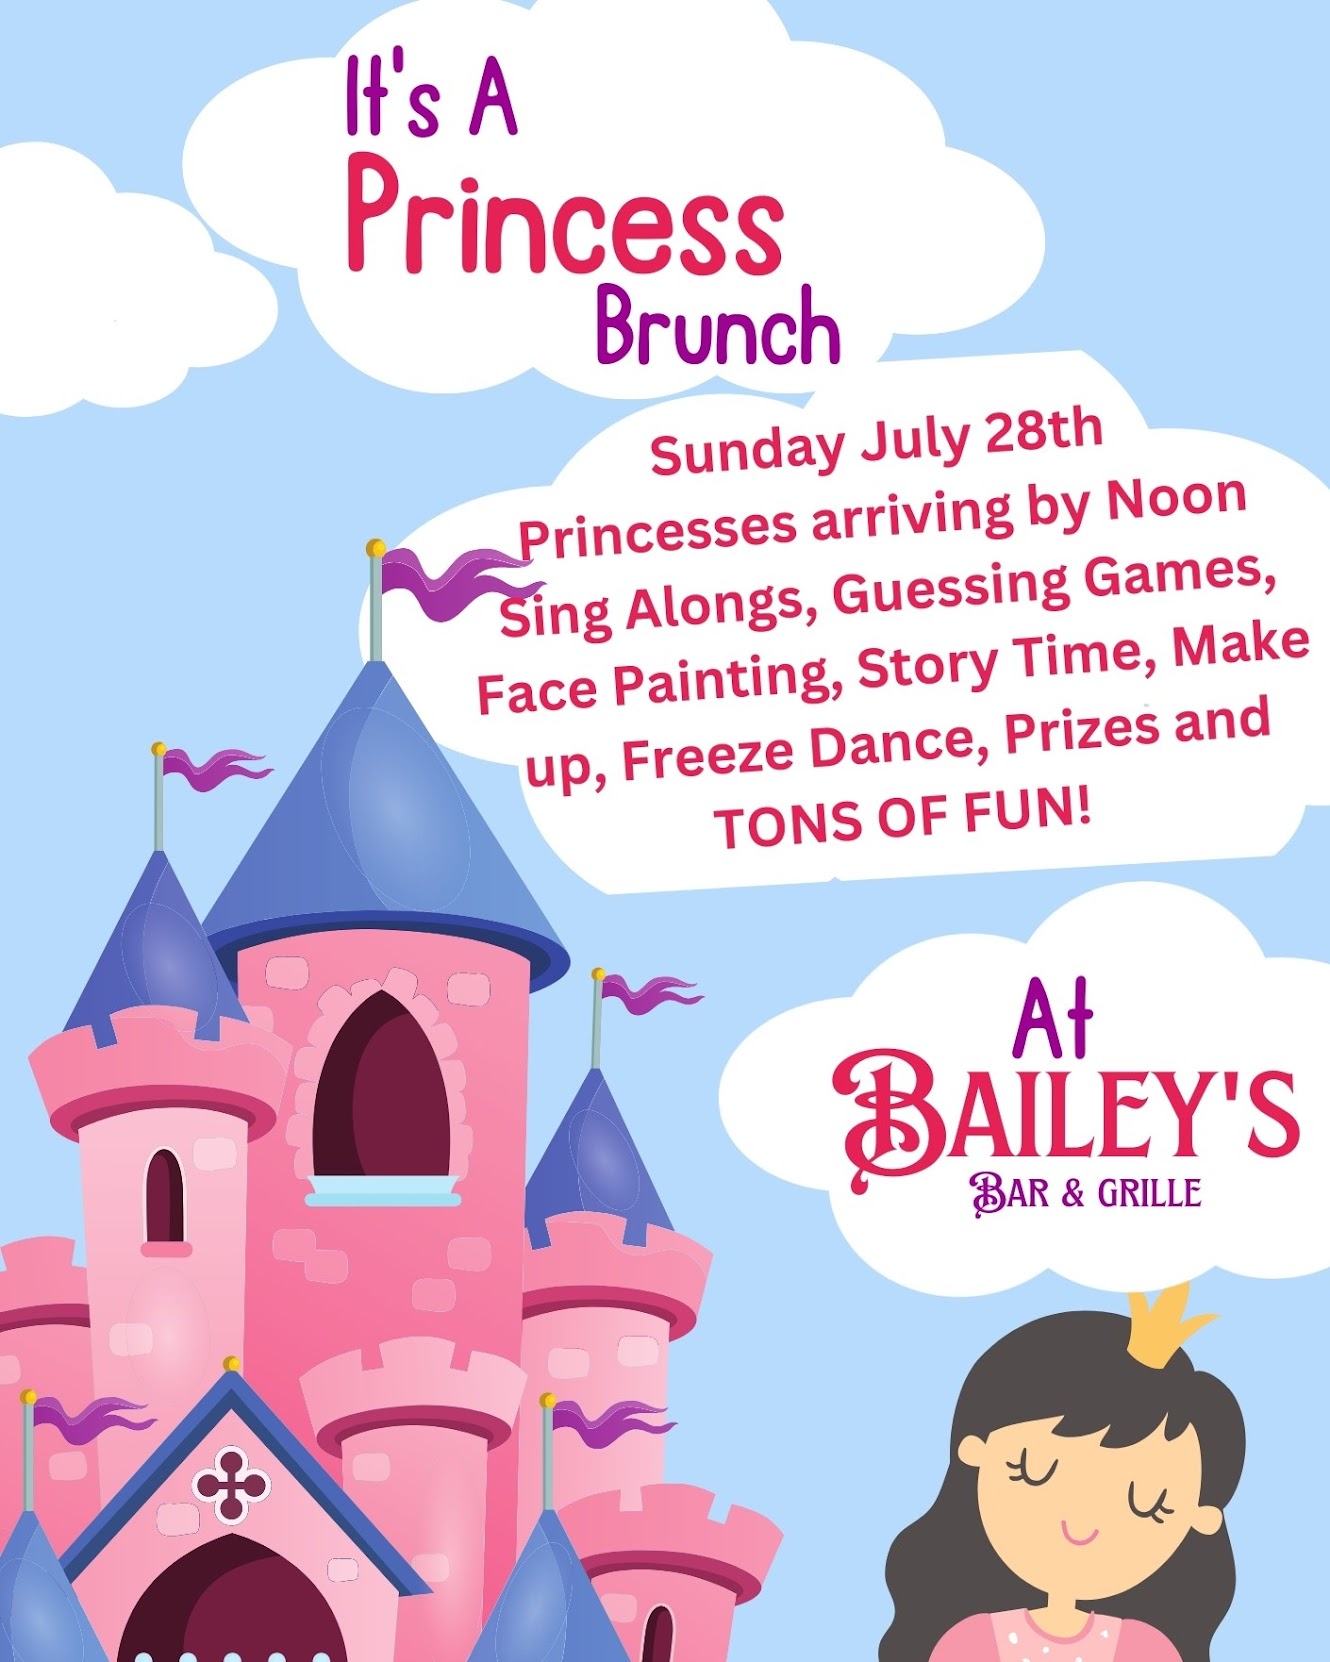 Illustration of a castle with event details: "It's A Princess Brunch, Sunday July 28th, Bailey's Bar & Grille, Princesses arriving by noon. Sing Alongs, Games, Face Painting, Story Time, Prizes, and more!.